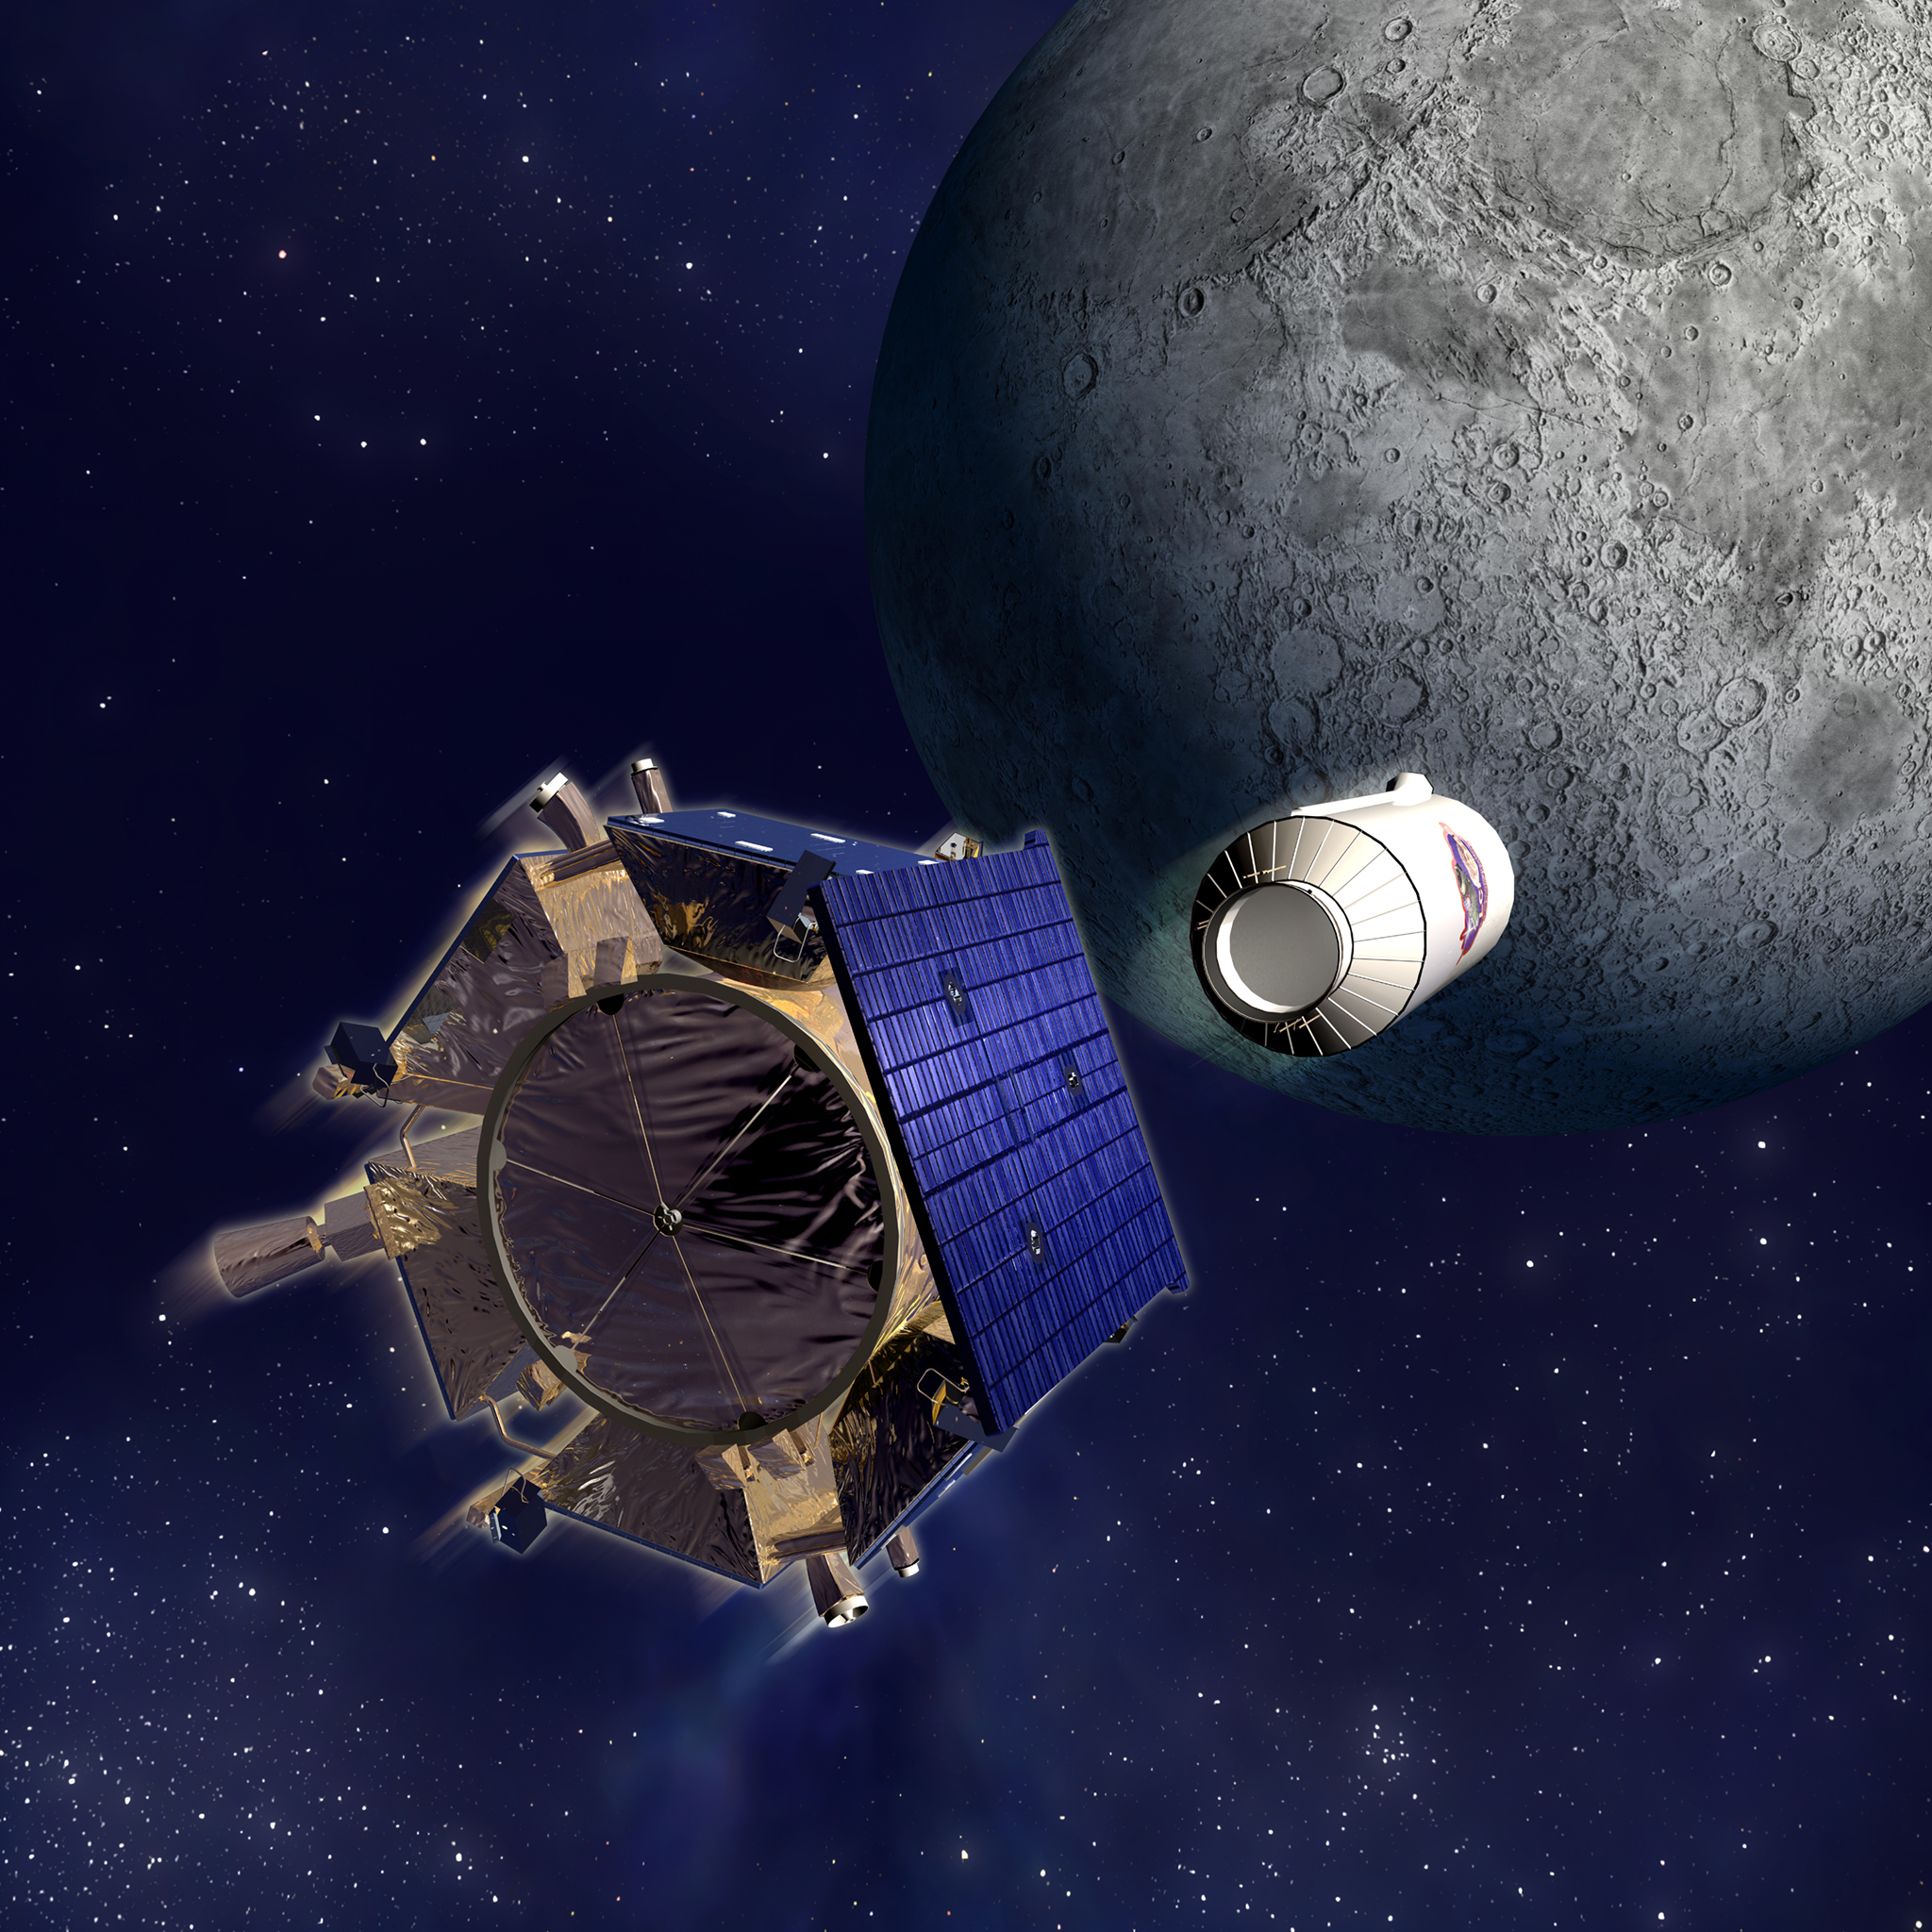 Artist's illustration of the Lunar Crater Observation and Sensing Satellite (LCROSS) separating from the rocket stage while both are on a collision course with the Moon, shown in the background.